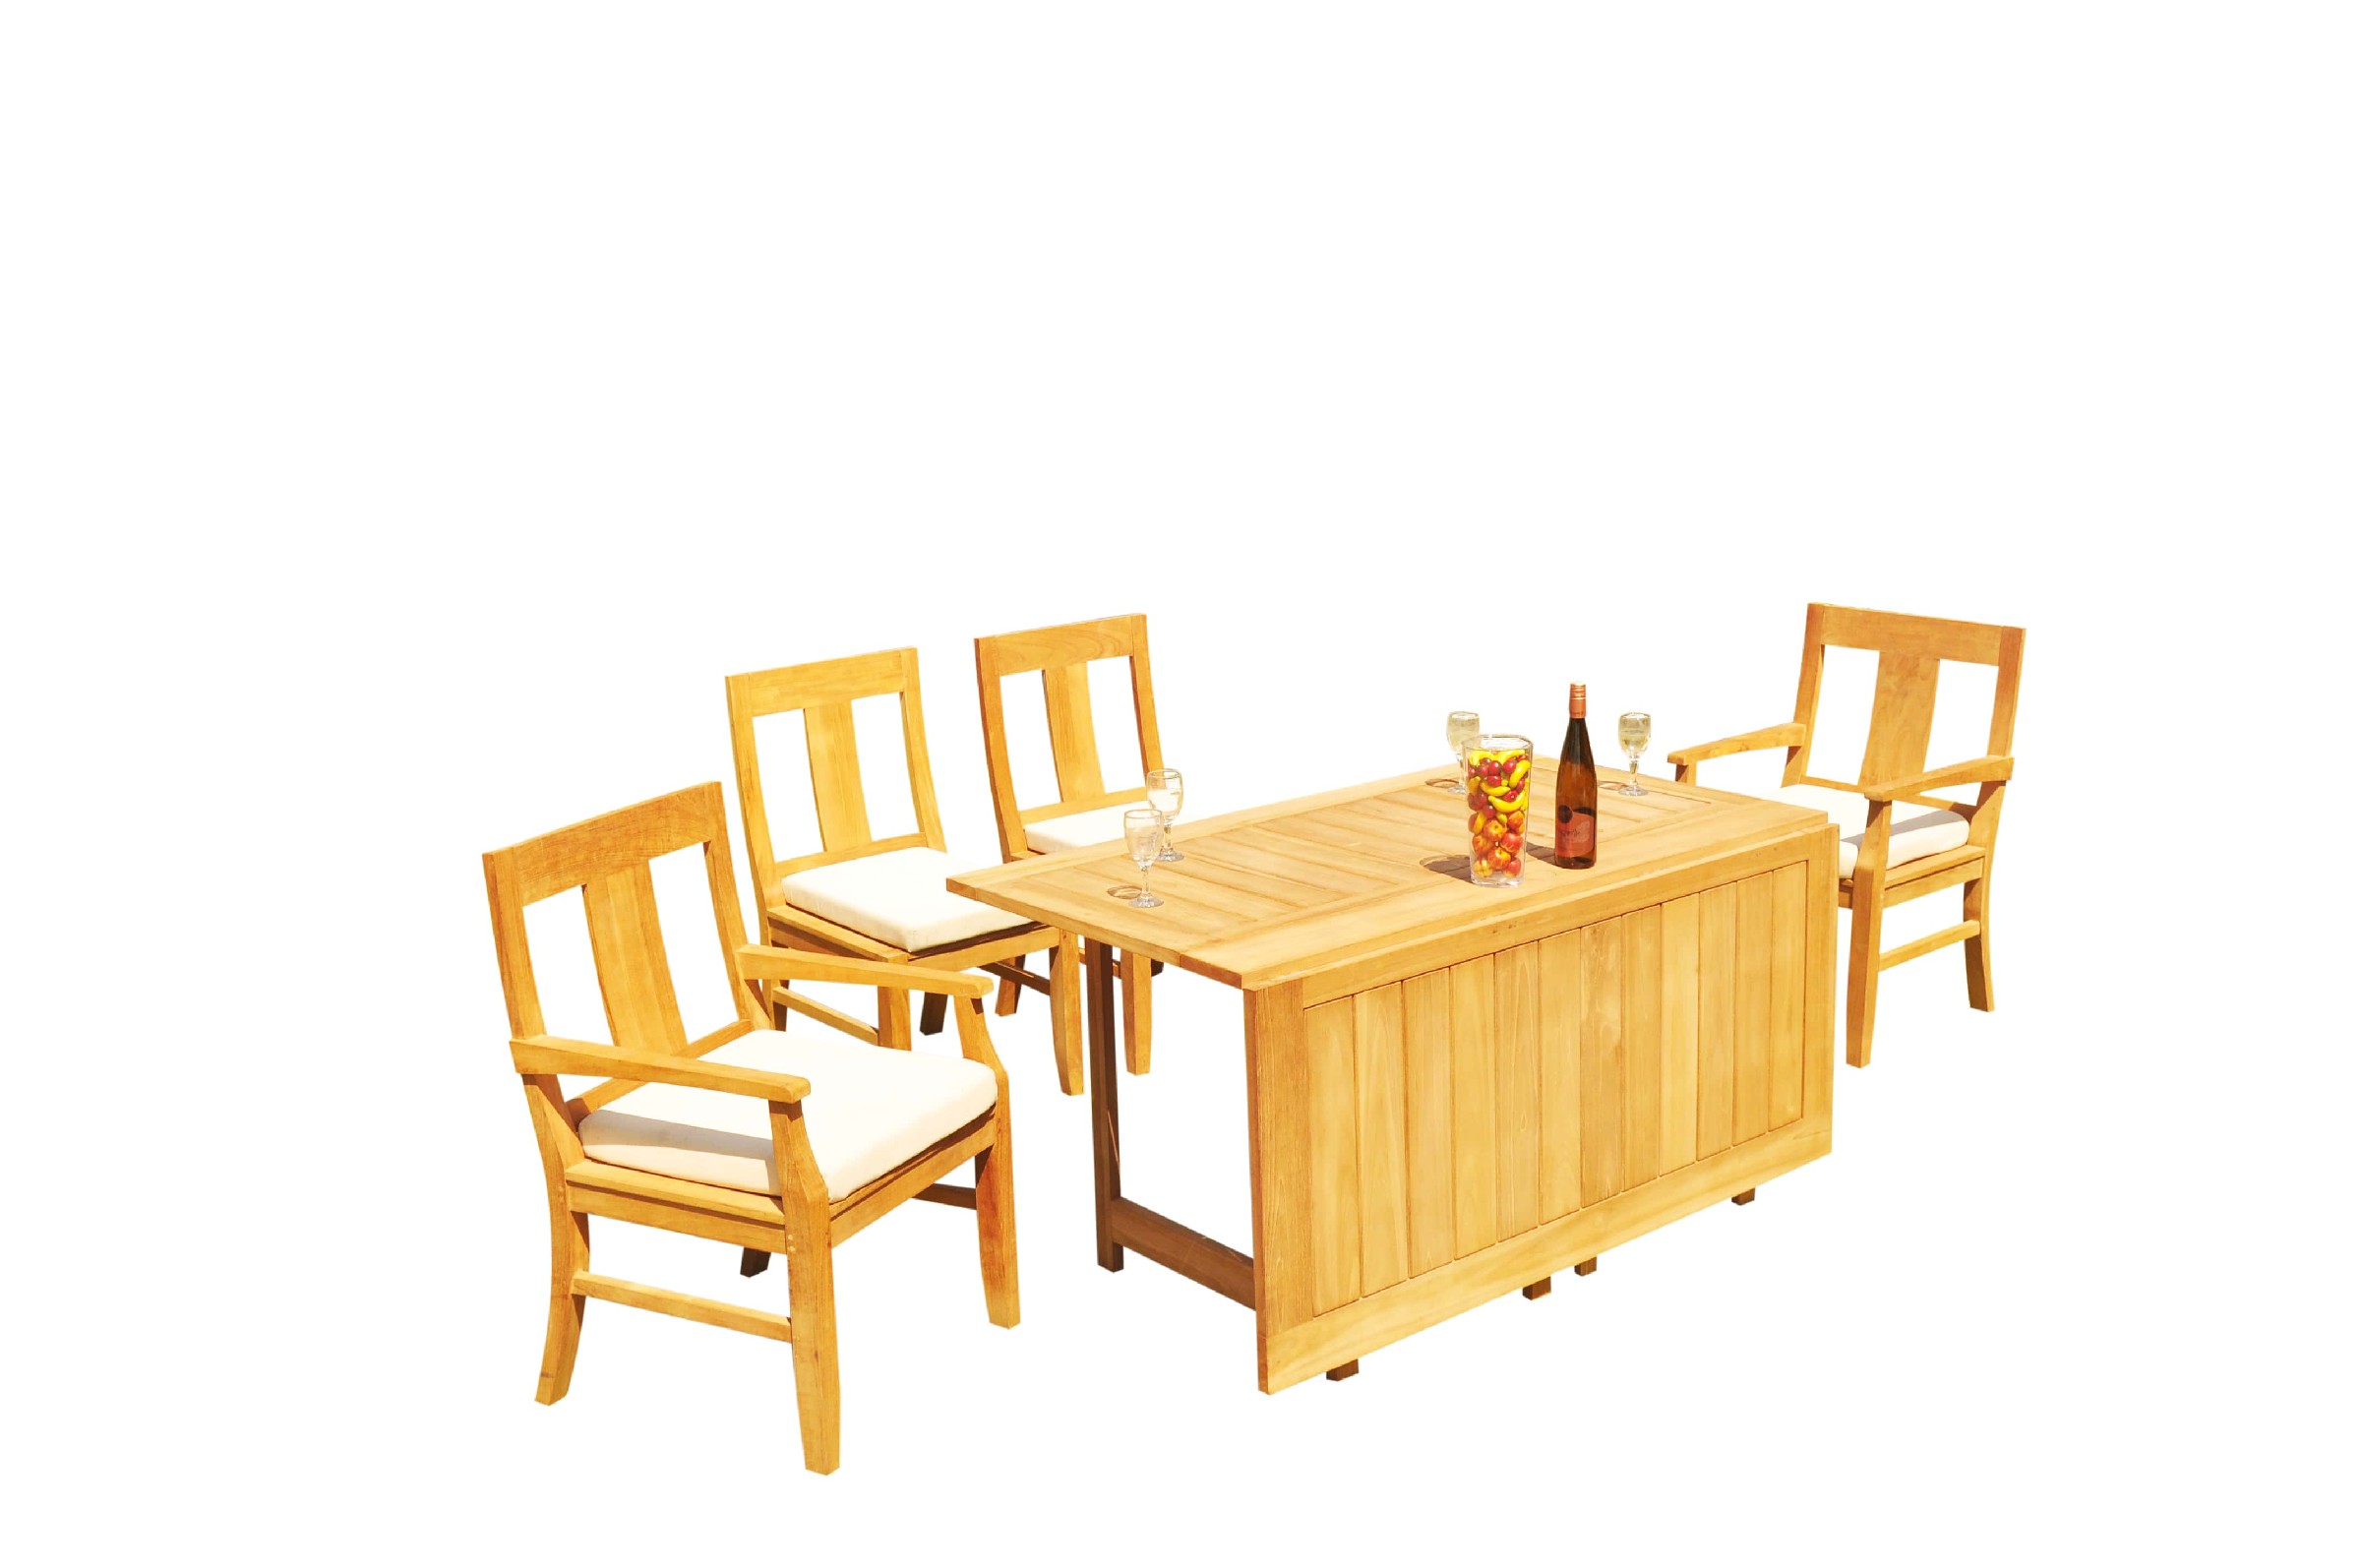 Grade-A Teak Dining Set: 4 Seater 5 Pc: 60" Square Rectangle Butterfly Table And 4 Osborne Chairs (2 Arm & 2 Armless Chairs) WholesaleTeak #51OS1405 - image 4 of 6